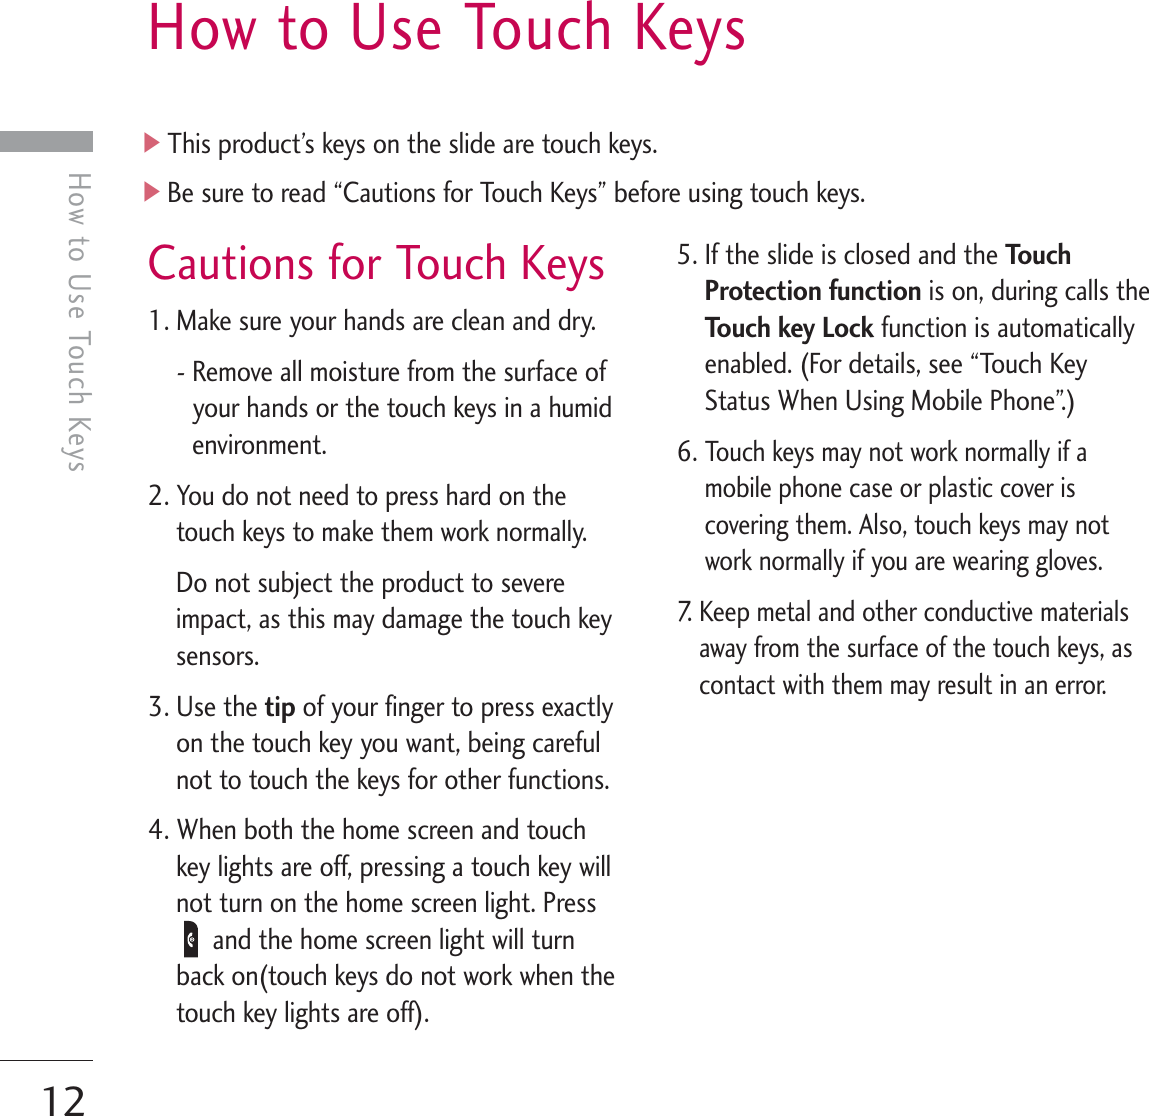 12How to Use Touch KeysCautions for Touch Keys1. Make sure your hands are clean and dry.- Remove all moisture from the surface ofyour hands or the touch keys in a humidenvironment.2. You do not need to press hard on thetouch keys to make them work normally.Do not subject the product to severeimpact, as this may damage the touch keysensors.3. Use the tip of your finger to press exactlyon the touch key you want, being carefulnot to touch the keys for other functions.4. When both the home screen and touchkey lights are off, pressing a touch key willnot turn on the home screen light. Pressand the home screen light will turnback on(touch keys do not work when thetouch key lights are off).5. If the slide is closed and the To u c hProtection function is on, during calls theTouch key Lock function is automaticallyenabled. (For details, see “Touch KeyStatus When Using Mobile Phone”.)6. Touch keys may not work normally if amobile phone case or plastic cover iscovering them. Also, touch keys may notwork normally if you are wearing gloves.7.  Keep metal and other conductive materialsaway from the surface of the touch keys, ascontact with them may result in an error.]This product’s keys on the slide are touch keys.]Be sure to read “Cautions for Touch Keys” before using touch keys.How to Use Touch Keys